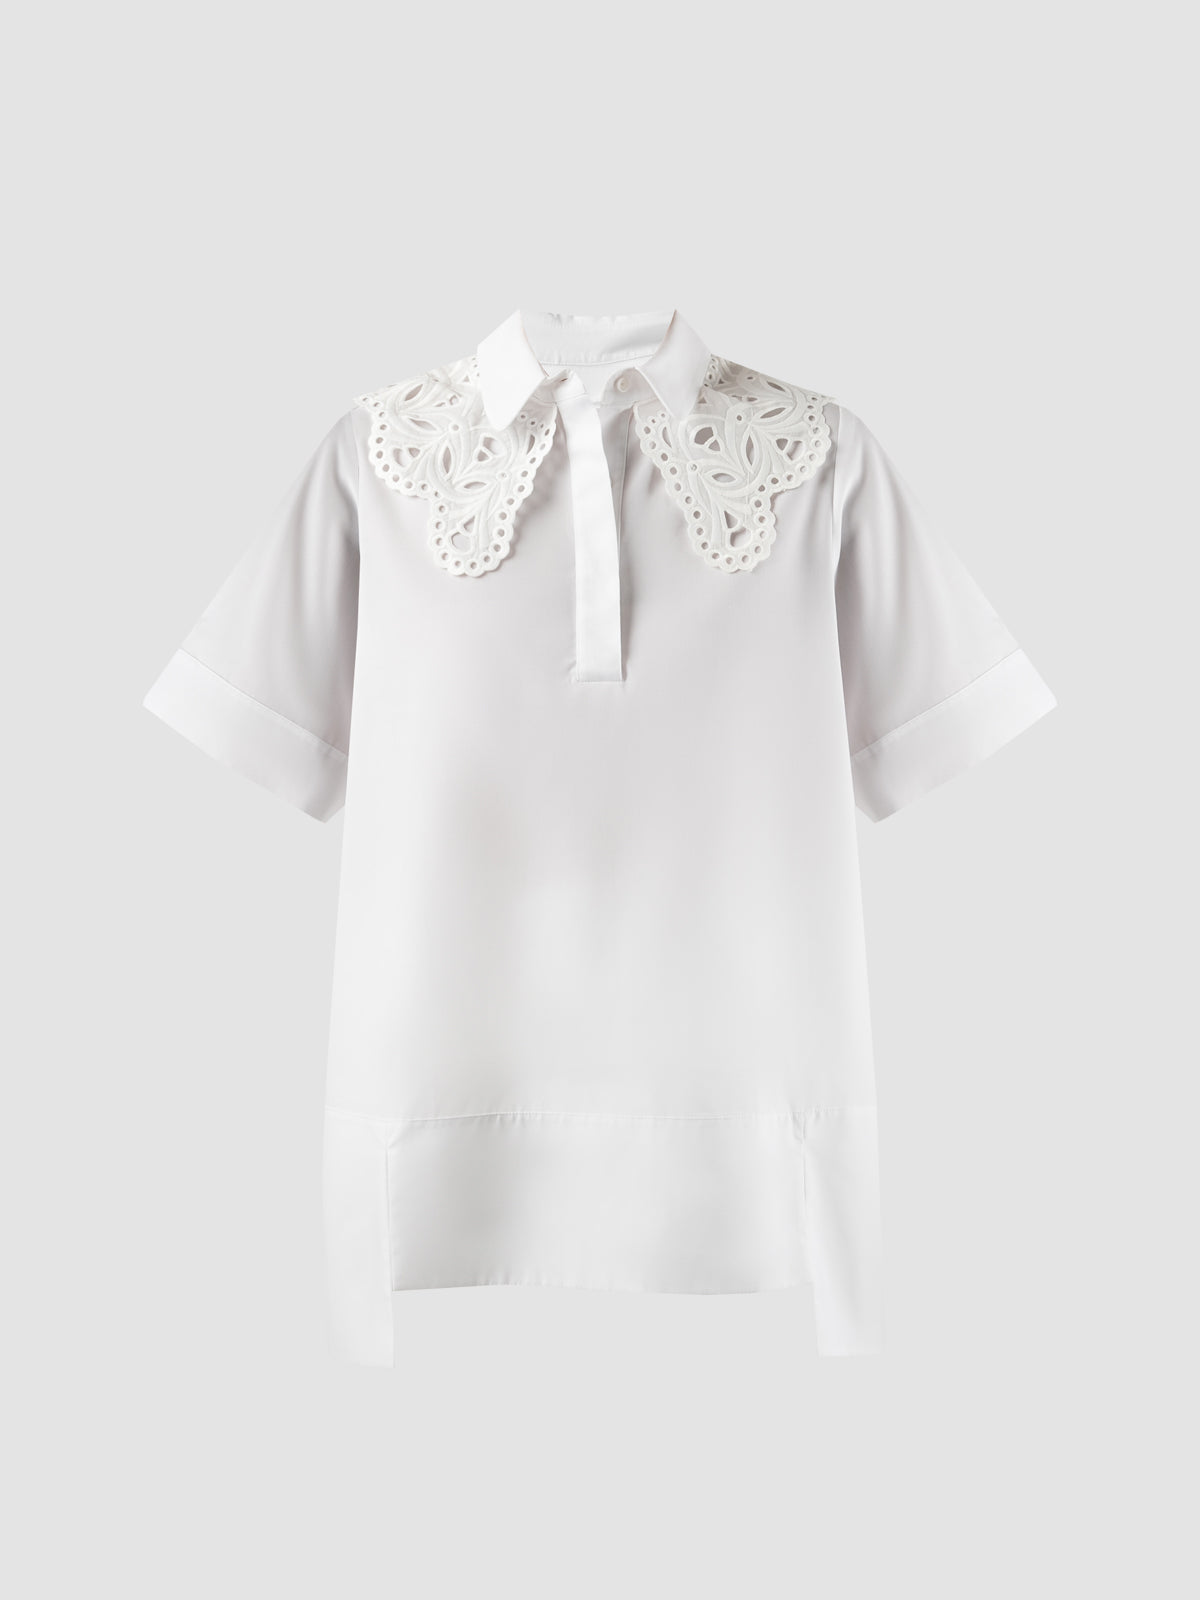 Gantari off white Maison blouse with embroidered collar